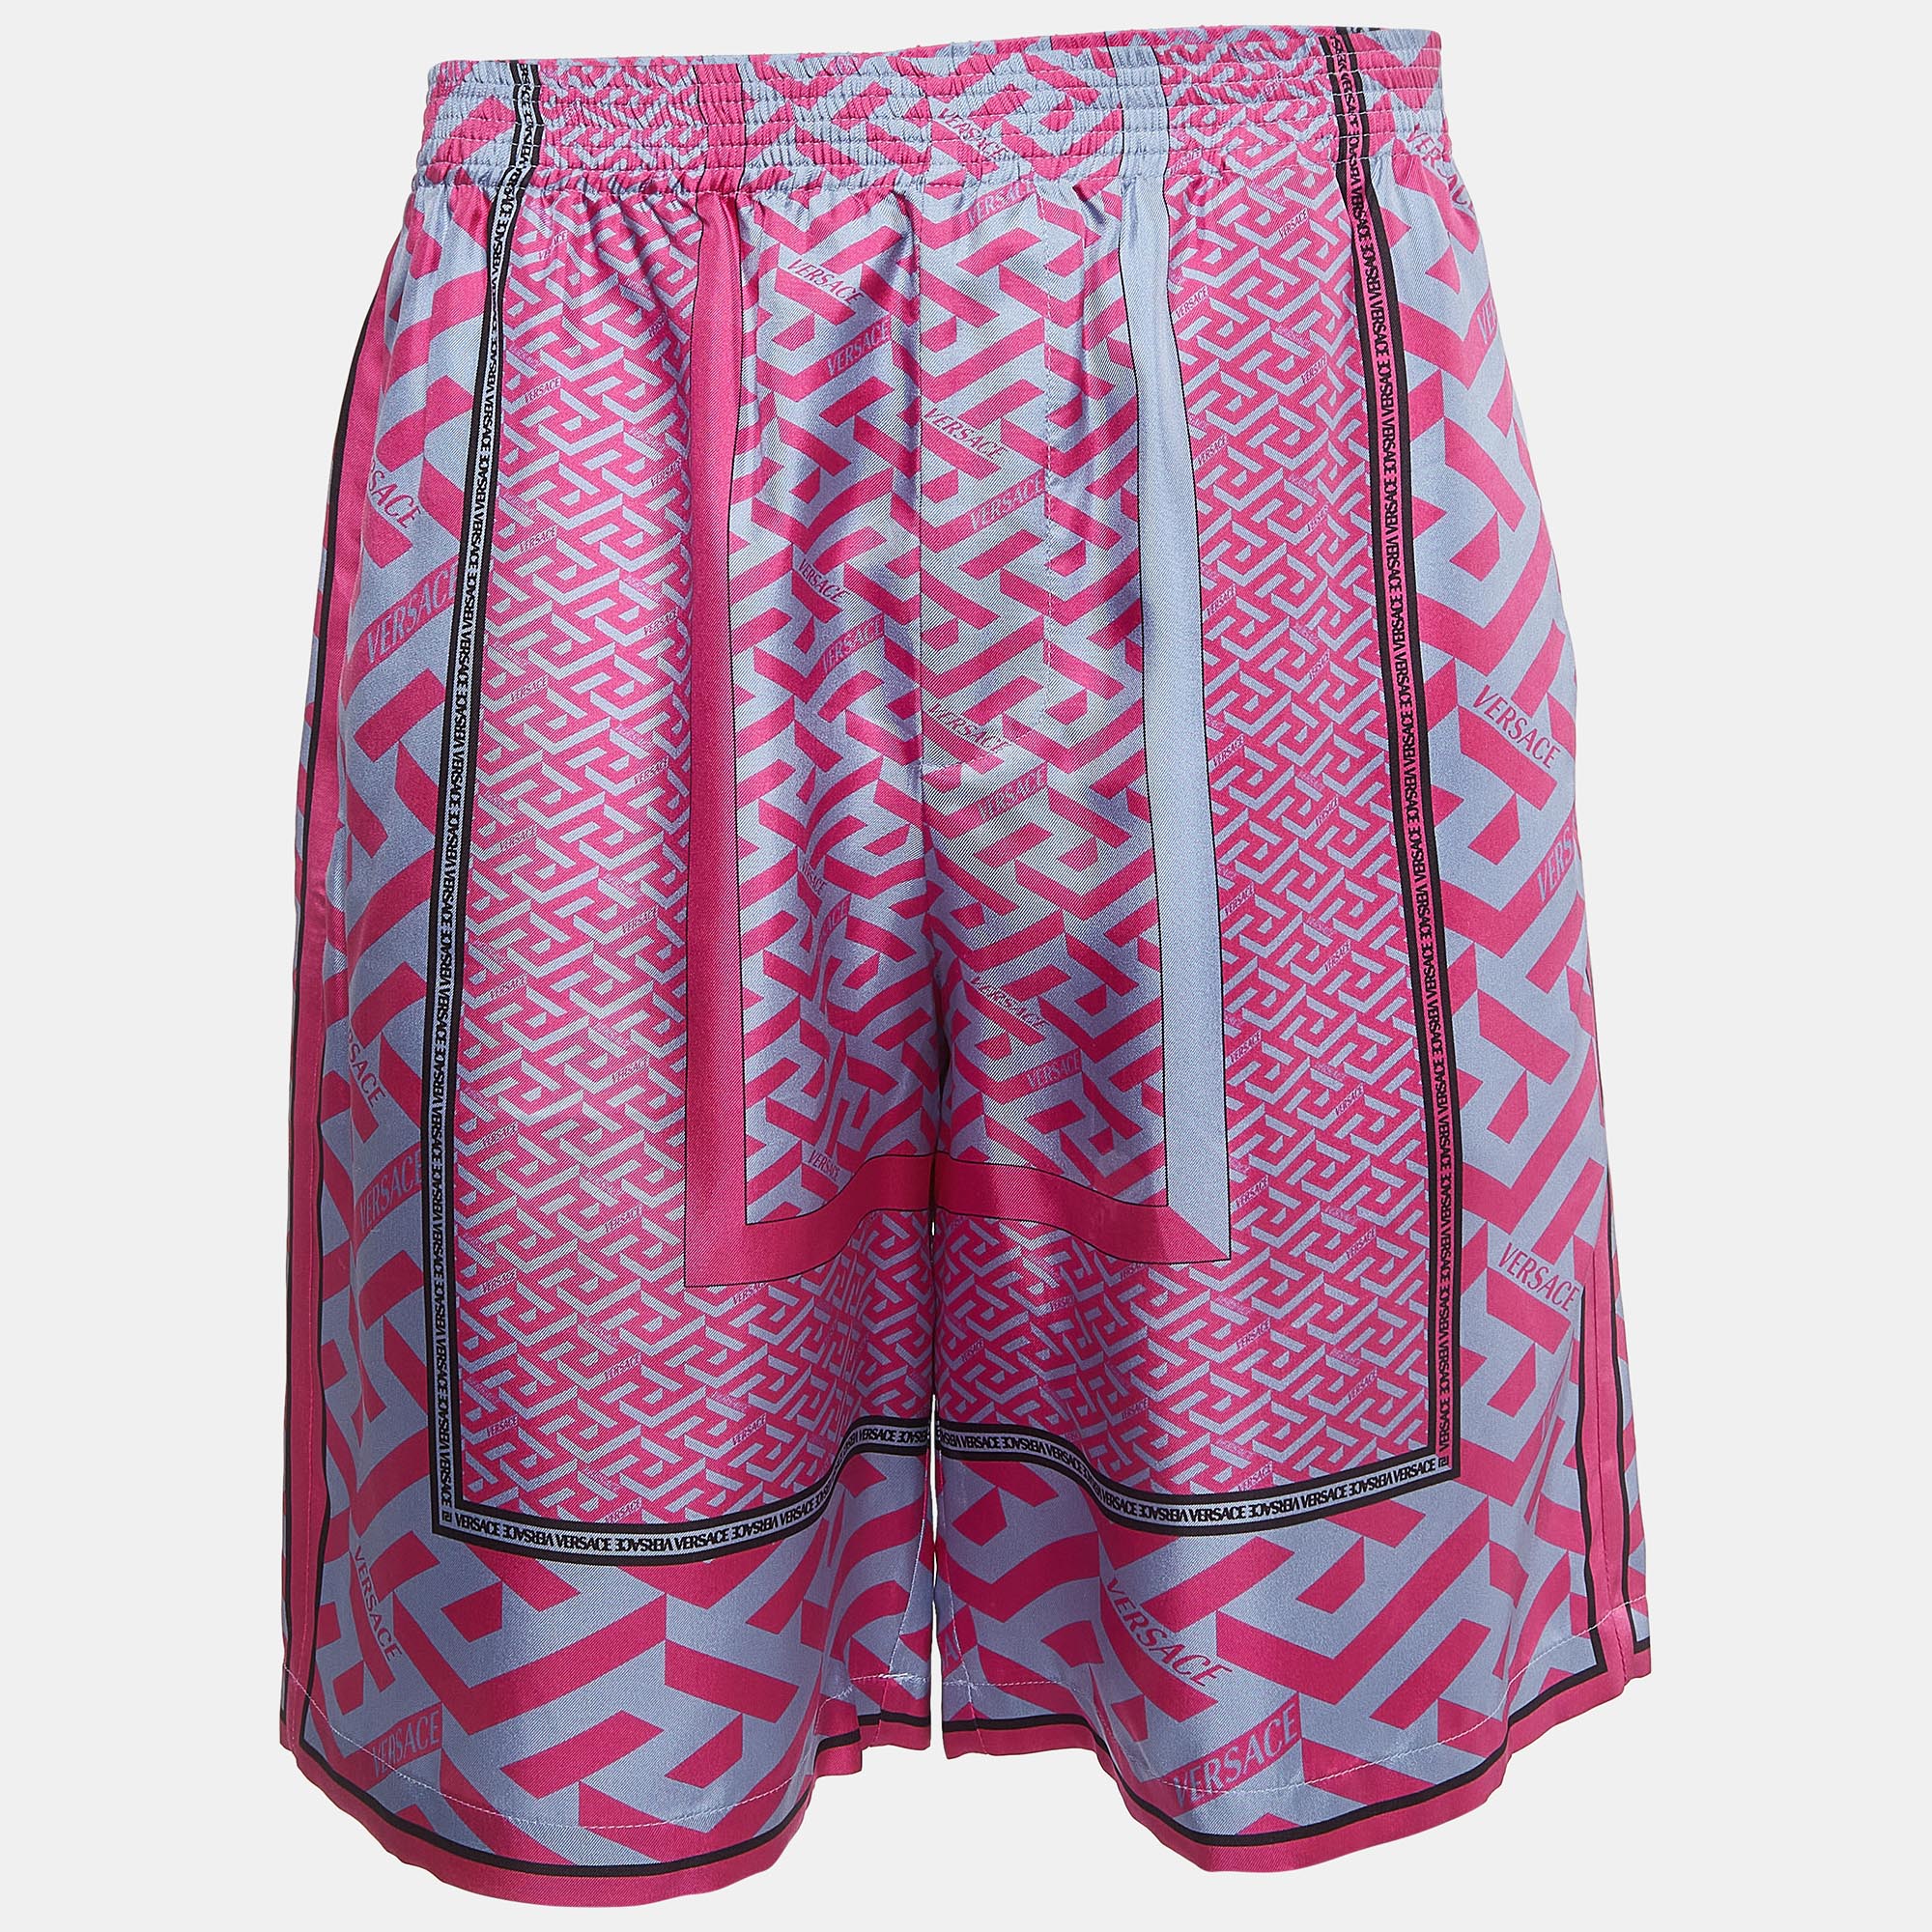 Crafted with precision the Versace La Greca shorts exude contemporary charm. A fusion of luxury and style these shorts feature intricate paneling and a vibrant print. Made from sumptuous silk they offer comfort with a touch of opulence perfect for making a statement with flair.